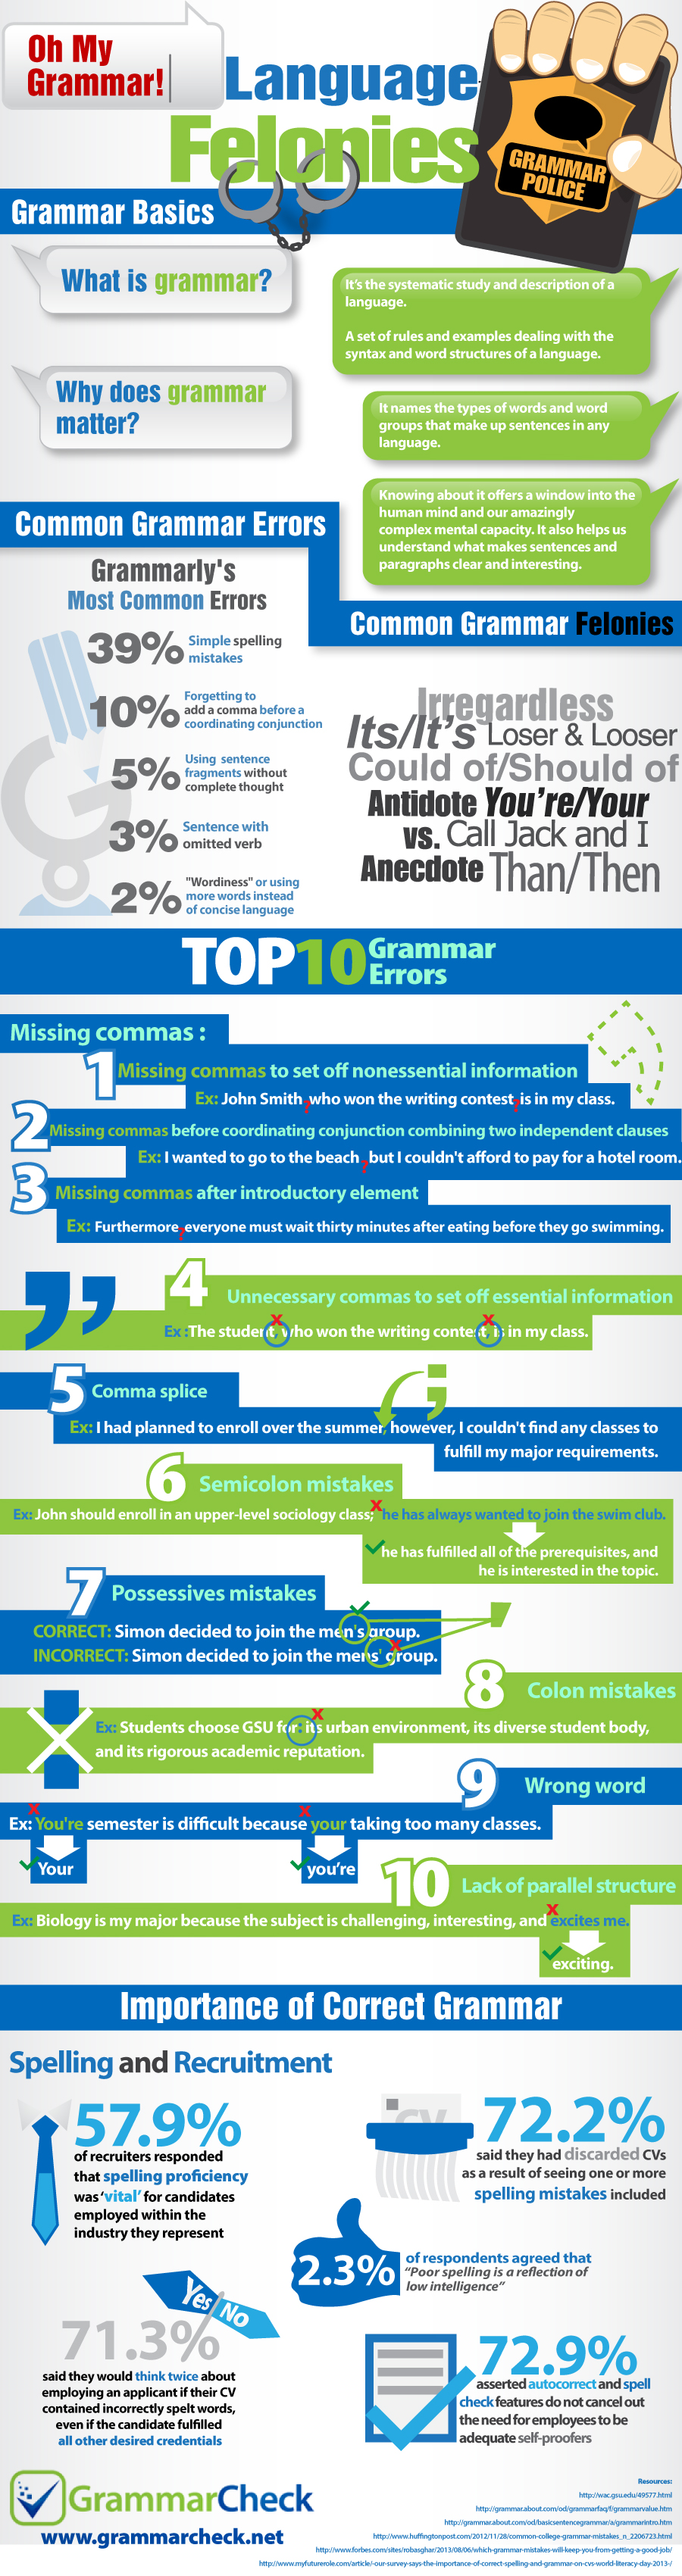 Oh My Grammar! Language Felonies: Top 10 Grammar Errors, Common Mistakes, and the Importance of Correct Grammar (Infographic)